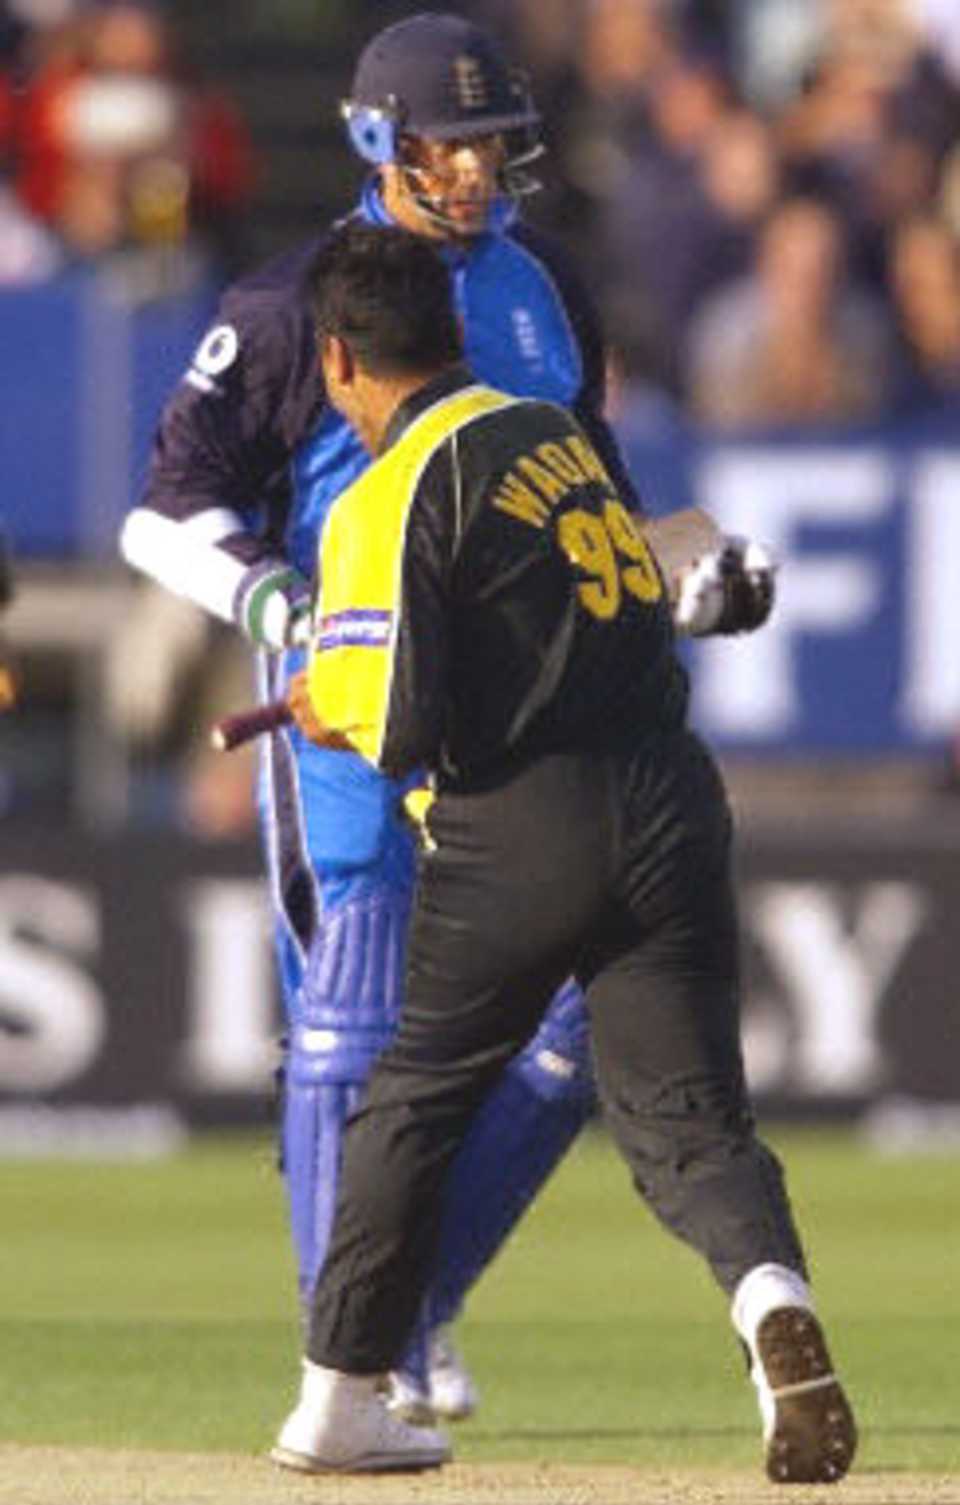 Waqar Younis gives Marcus Trescothick a send off, 1st ODI at Edgbaston, 7 June 2001.